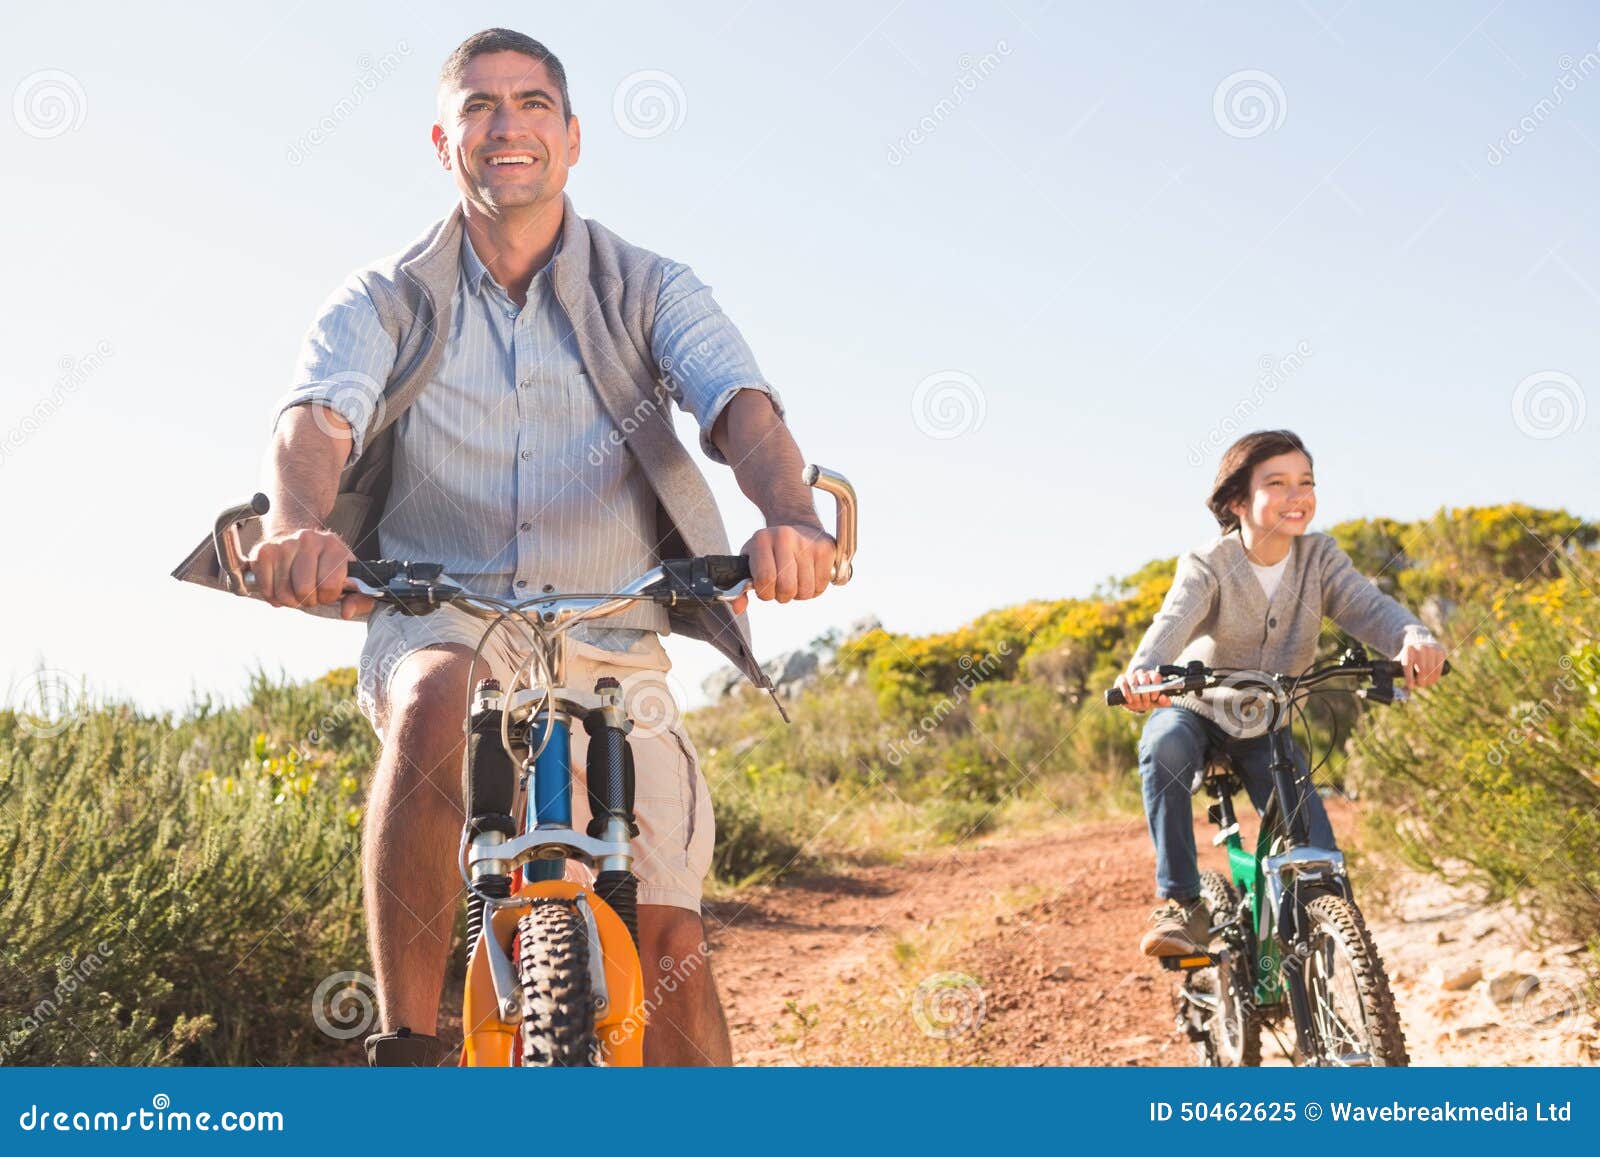 Father and son on a bike ride on a sunny day